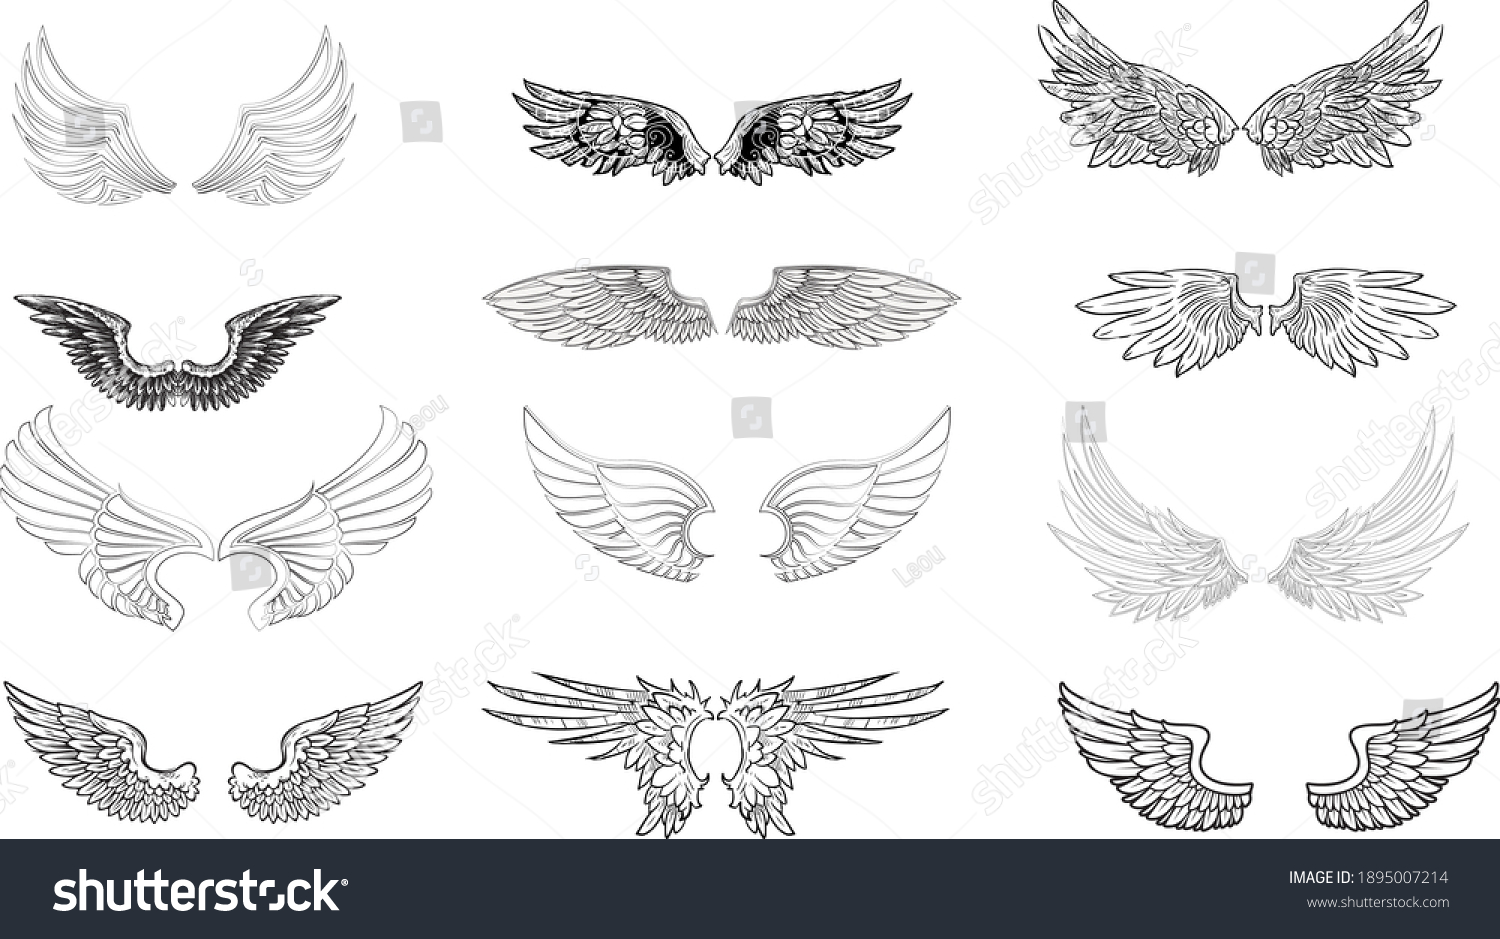 SVG of Wings Files For Cricut, Wing Files For Silhouette, Cut File, Angel Wings, Cut Files Illustration, Vector svg